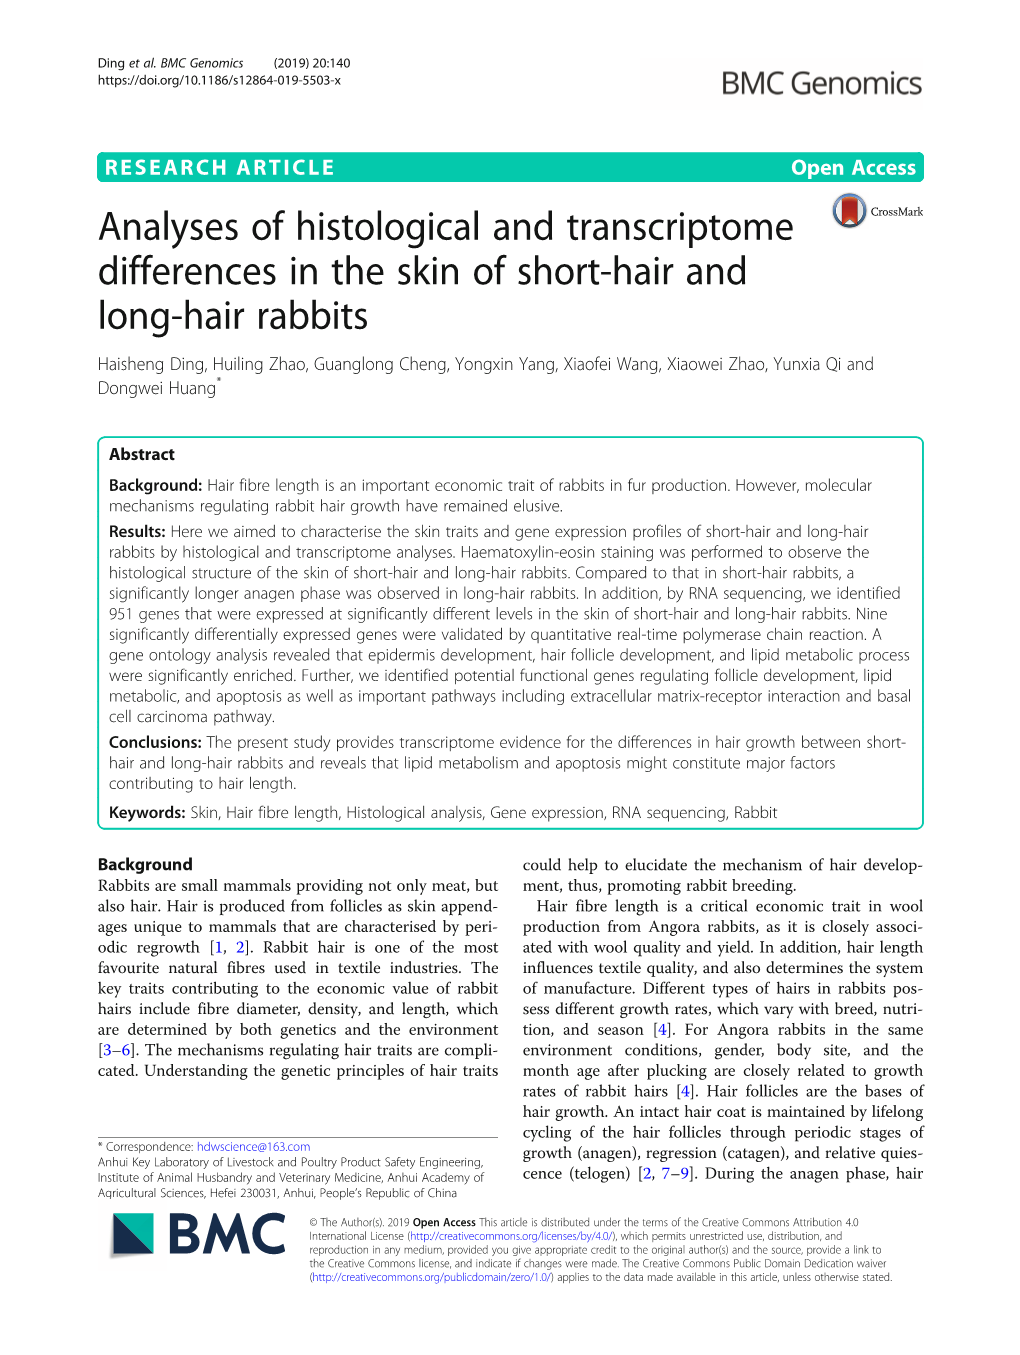 Analyses of Histological and Transcriptome Differences in the Skin